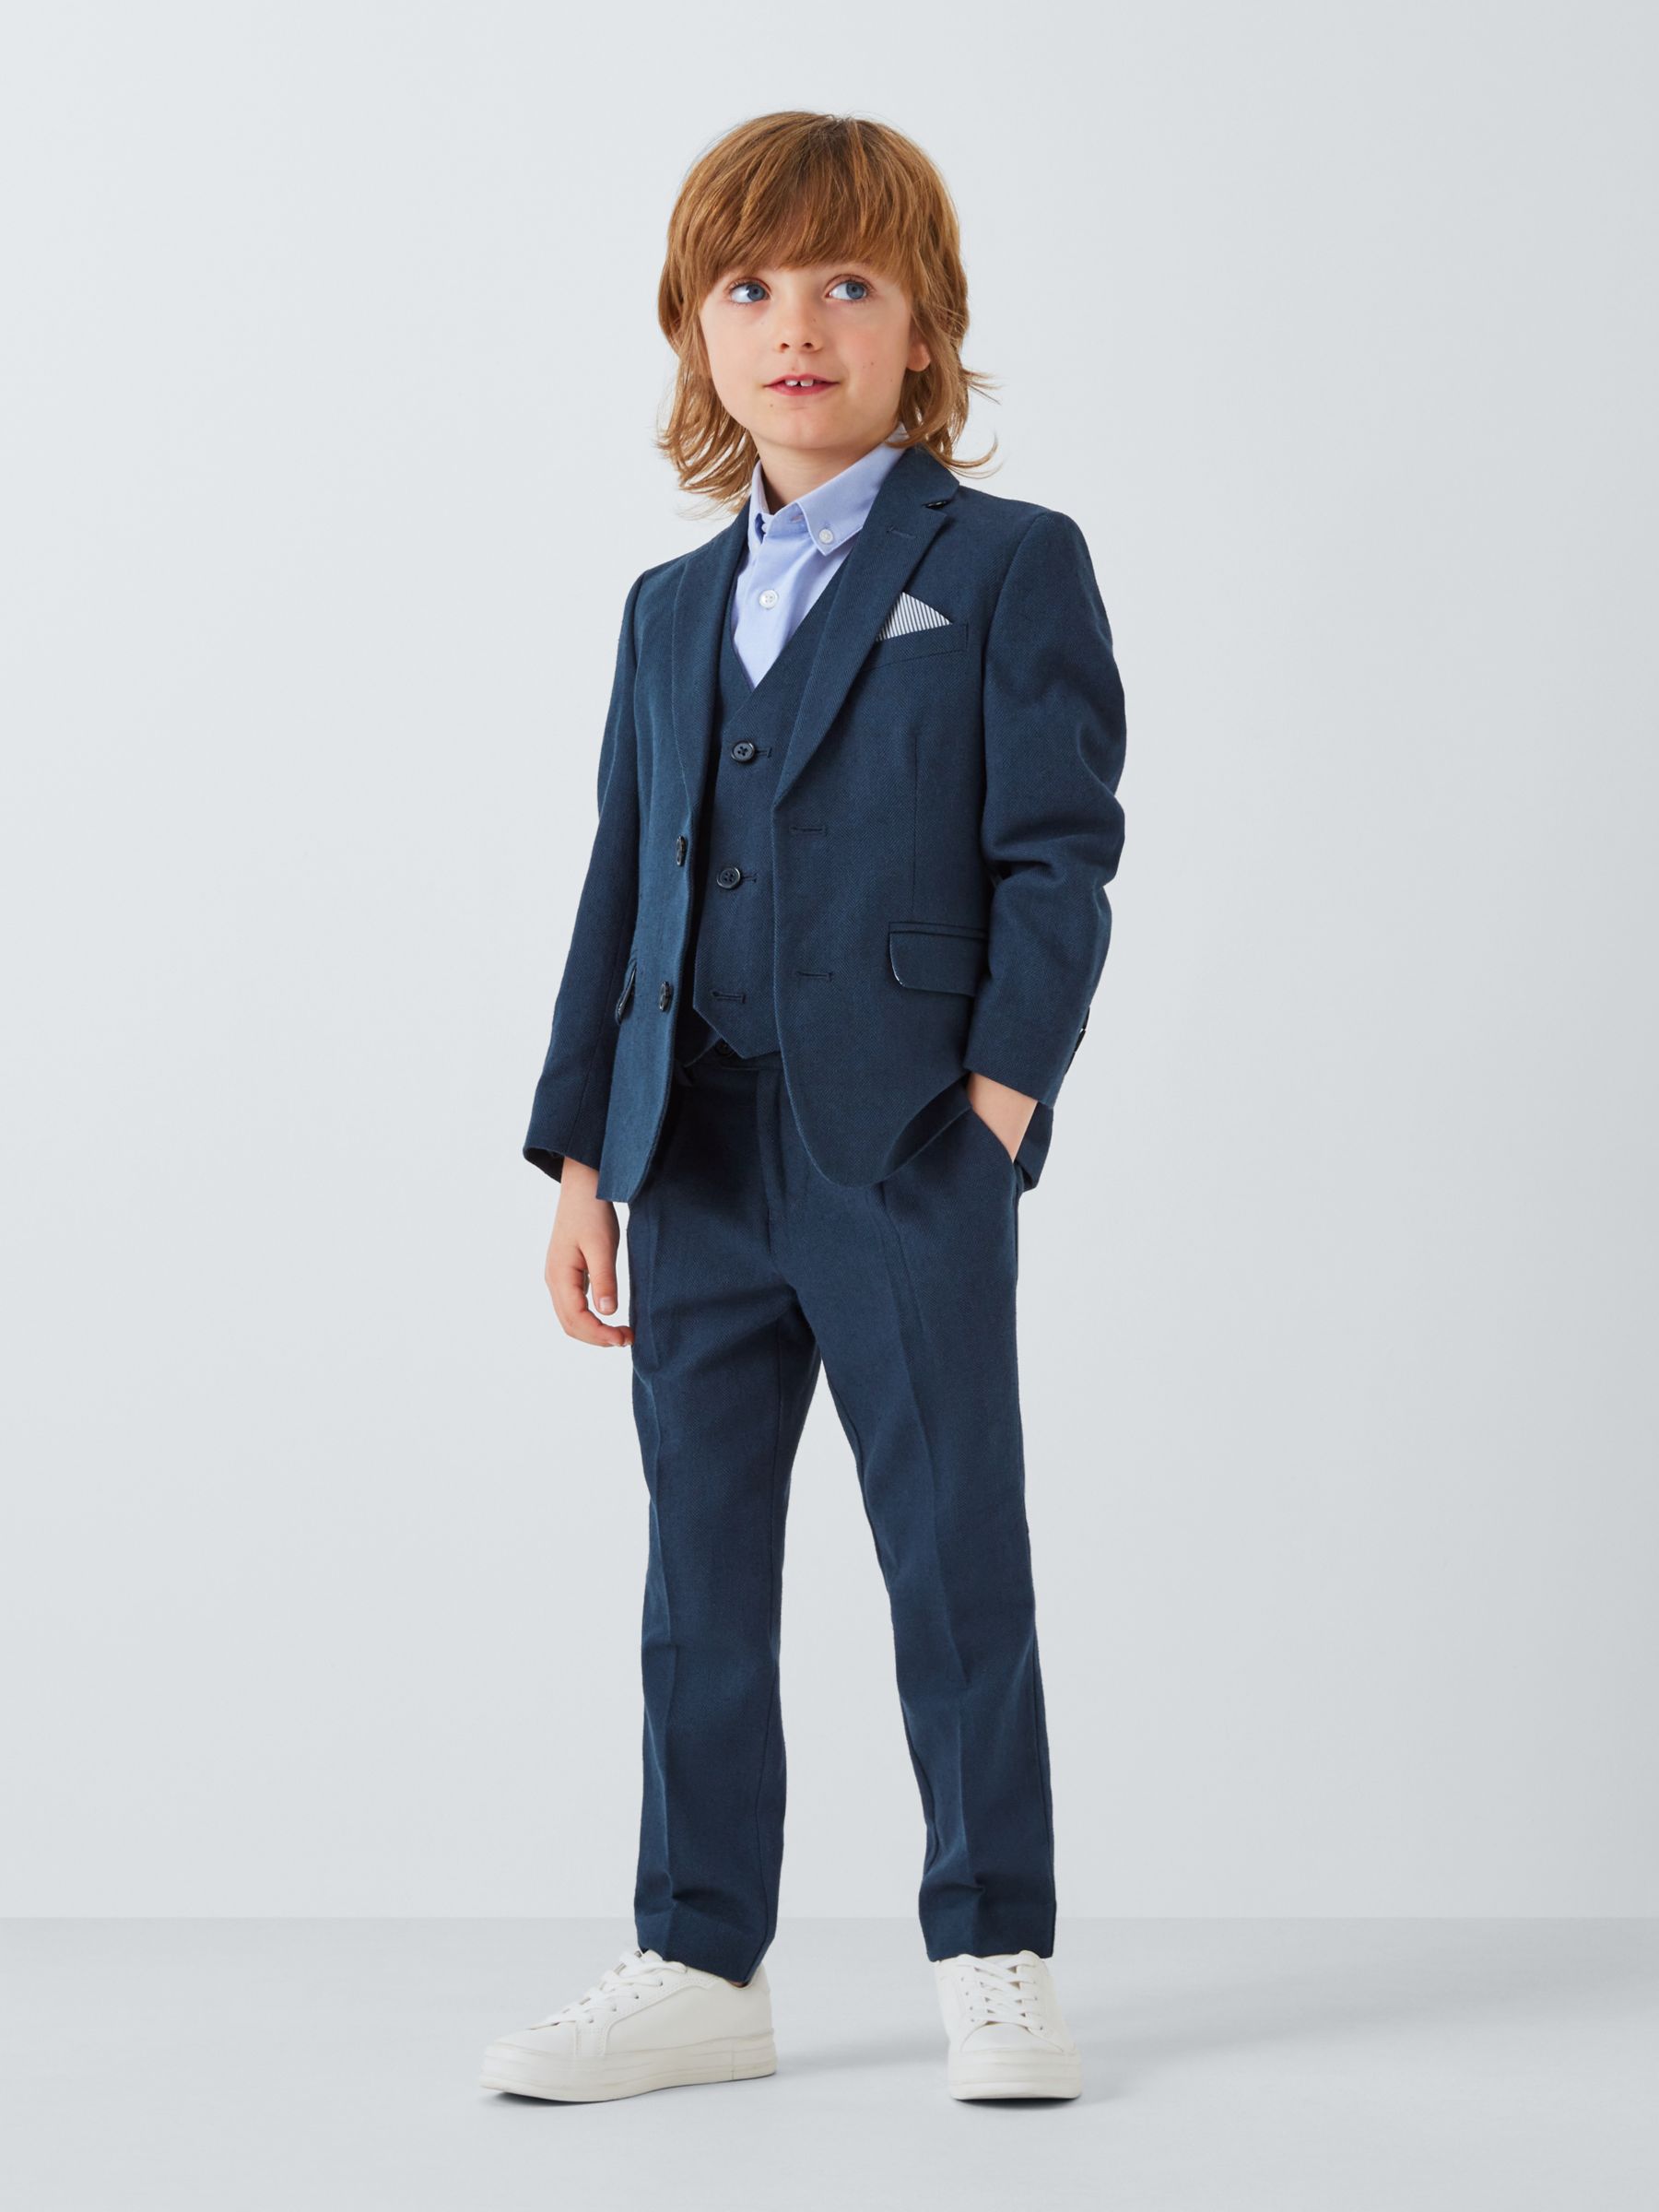 John Lewis Heirloom Collection Kids' Linen Blend Suit Trousers, Navy, 3 years